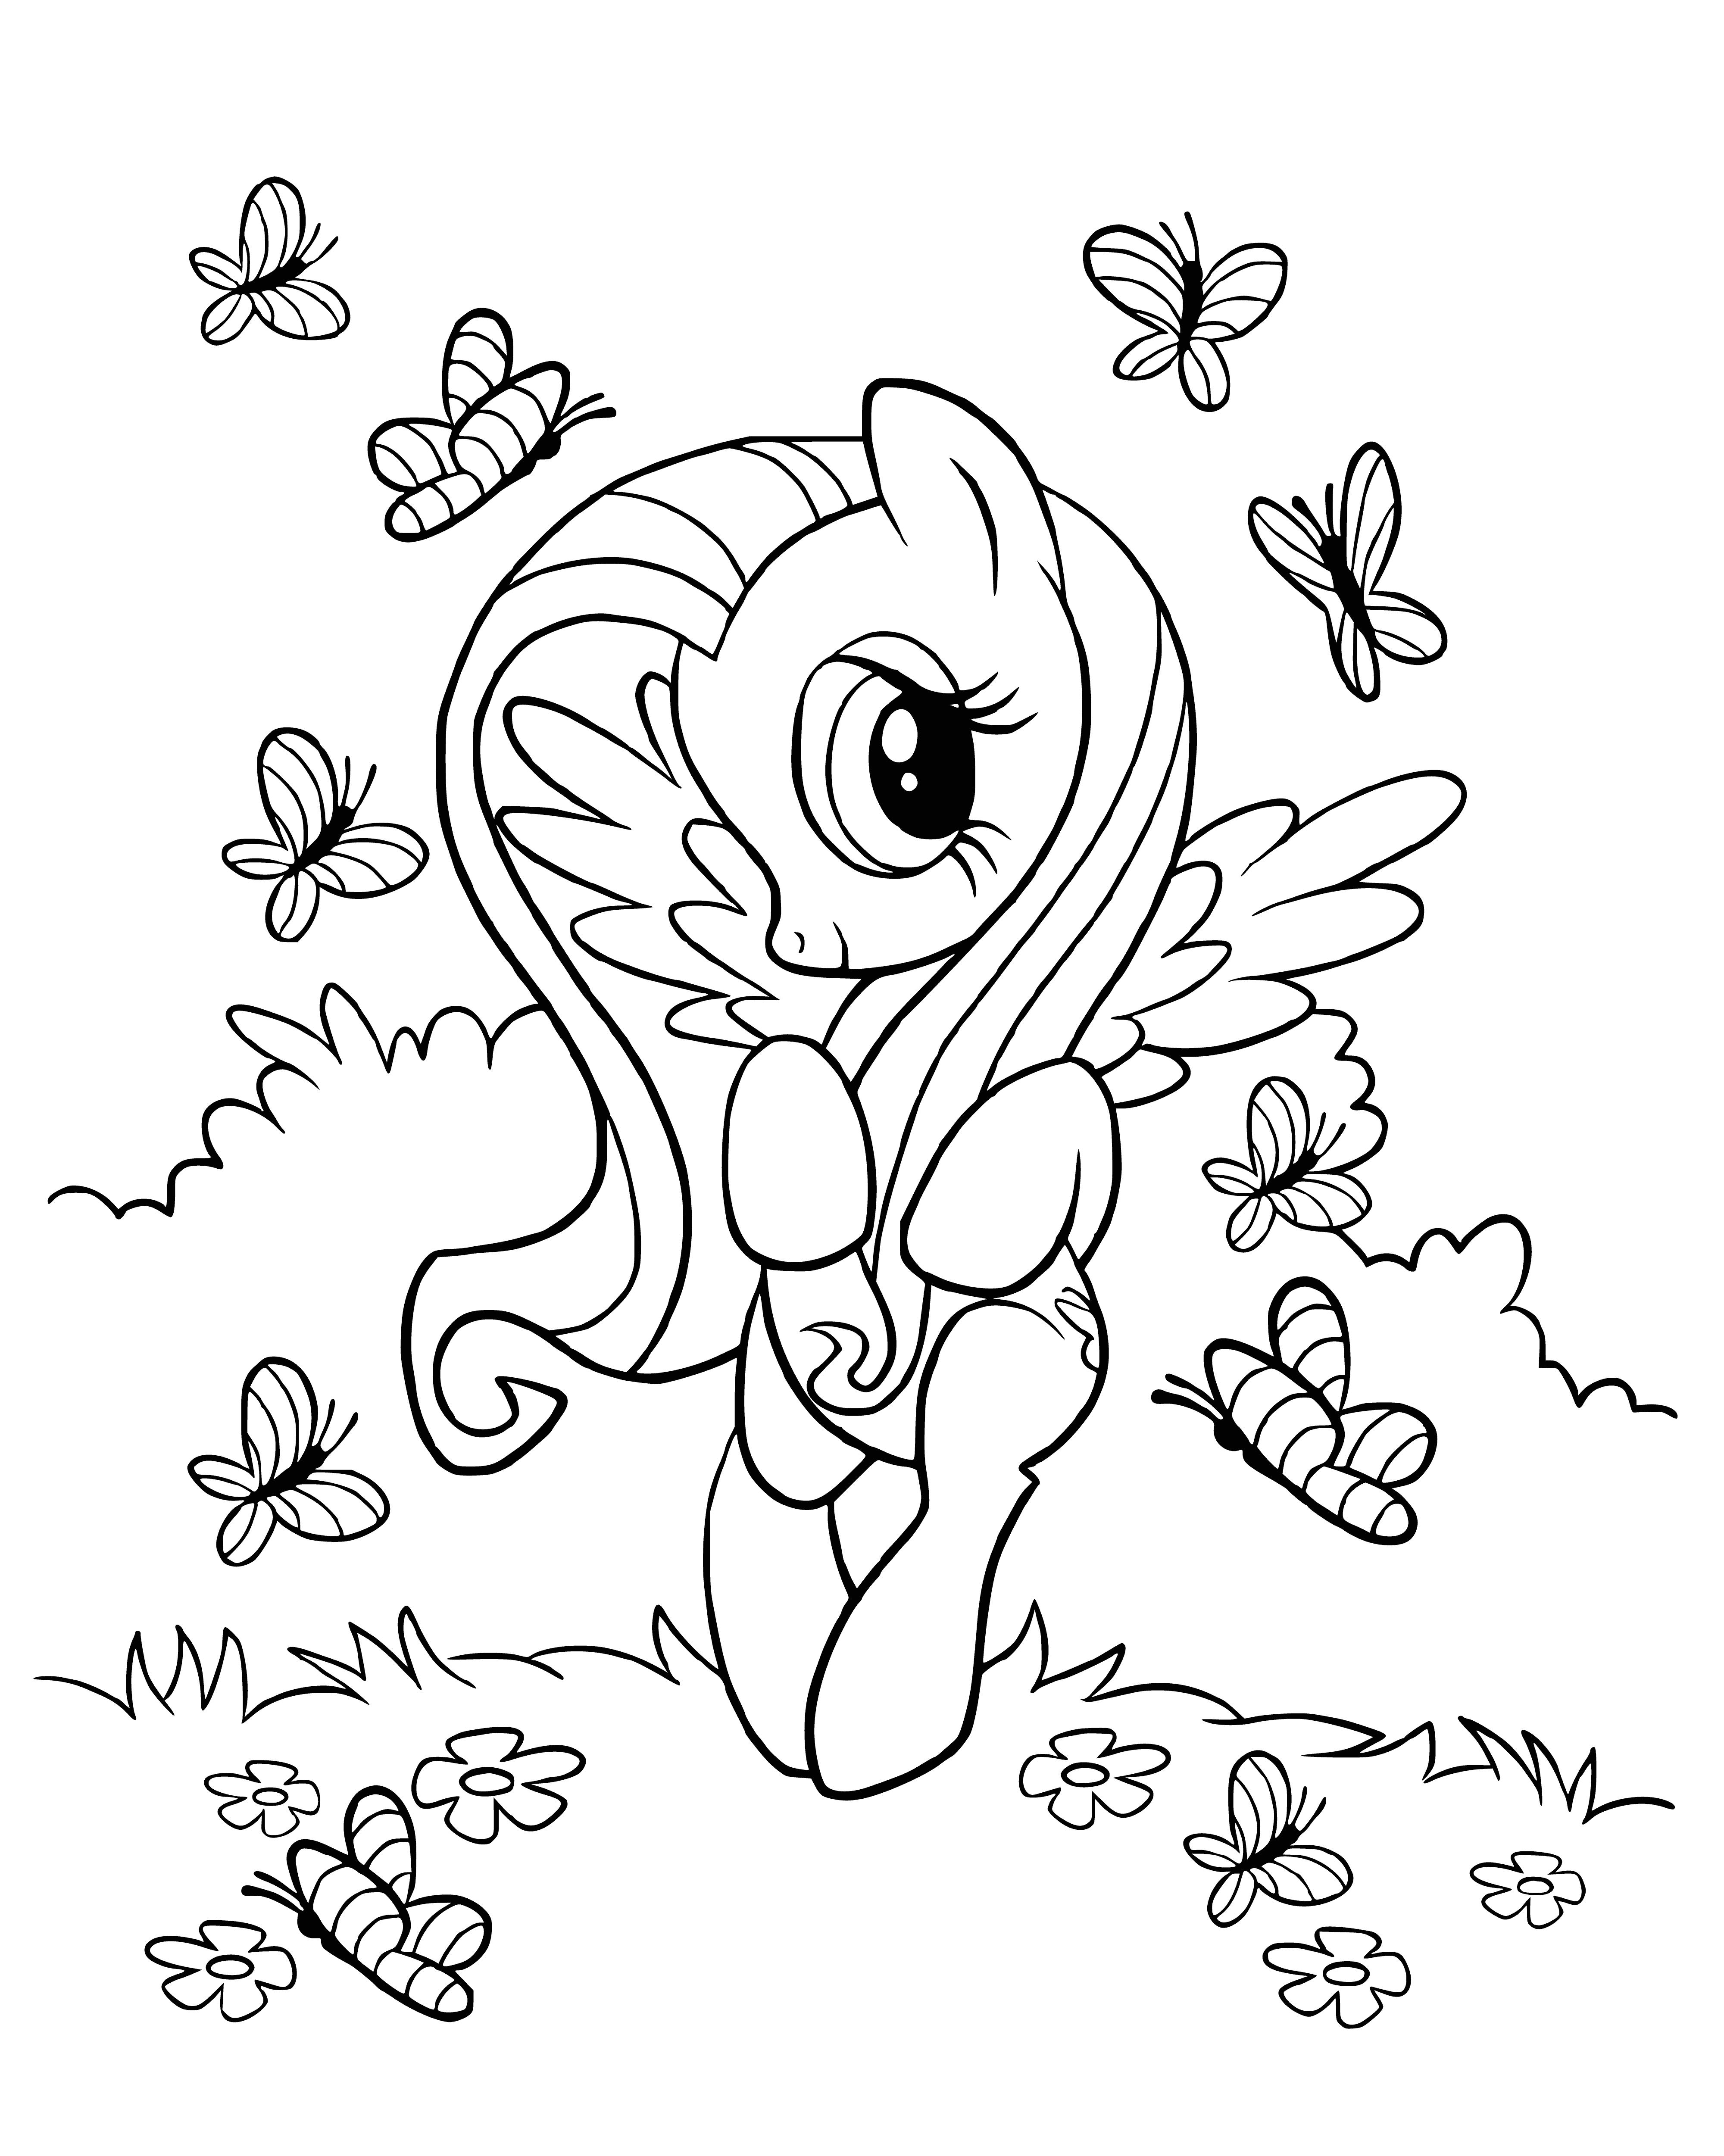 coloring page: Small yellow pony w/ purple mane/tail, gentle face/long pink lashes, 3 pink flowers cutie mark, standing in meadow full of tall grasses/wildflowers.